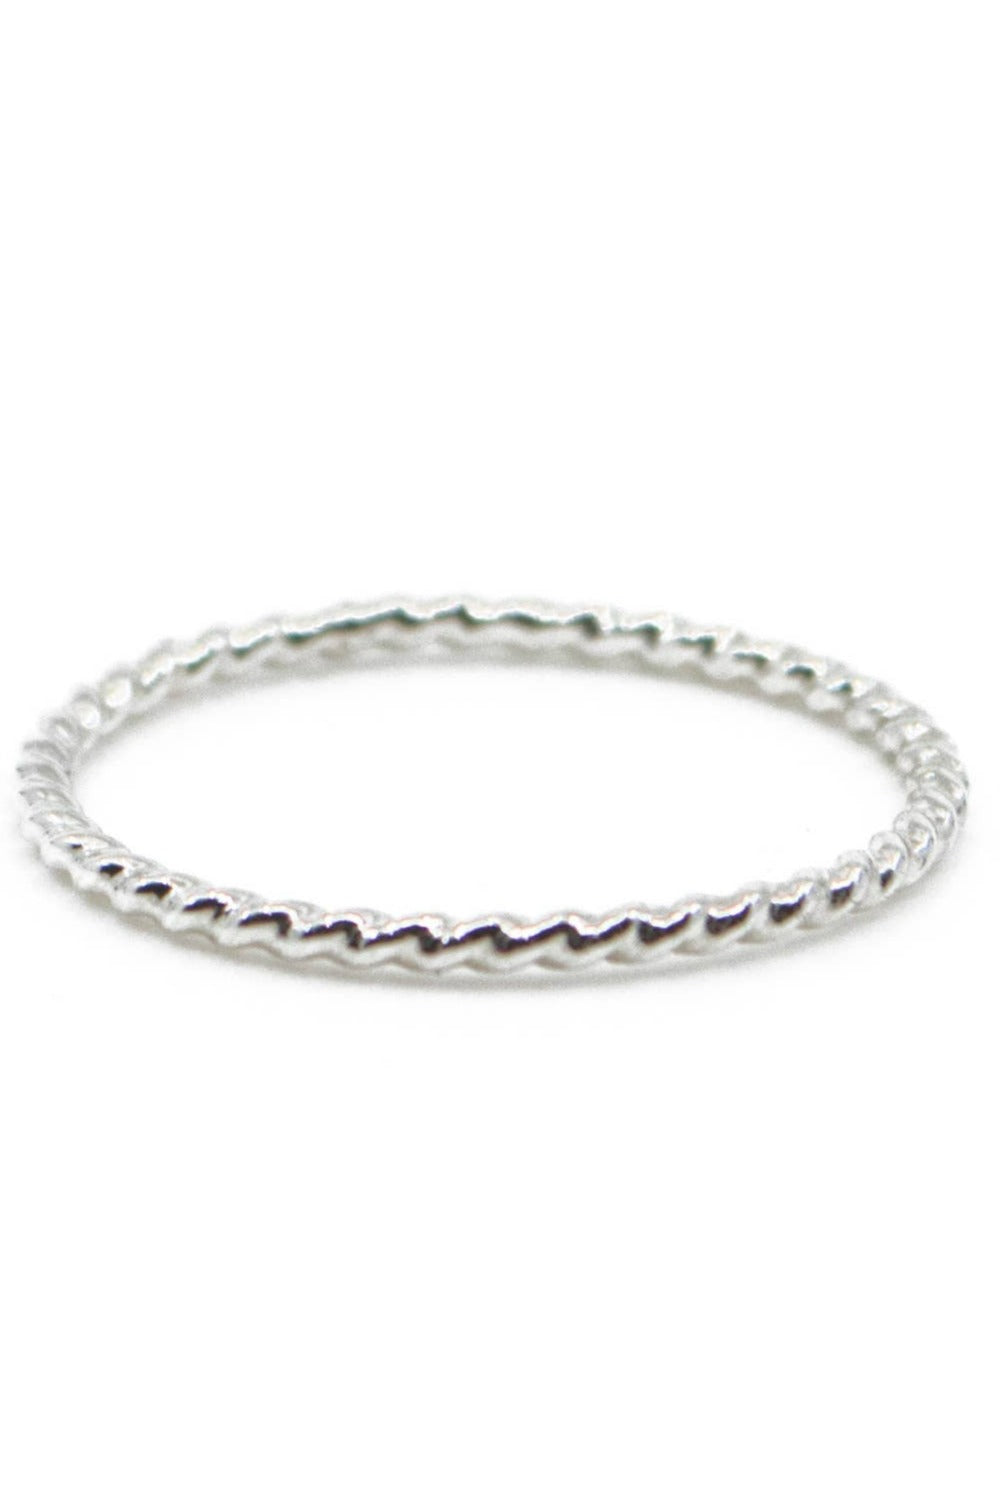 The Land of Salt Twist Stacking Ring Silver